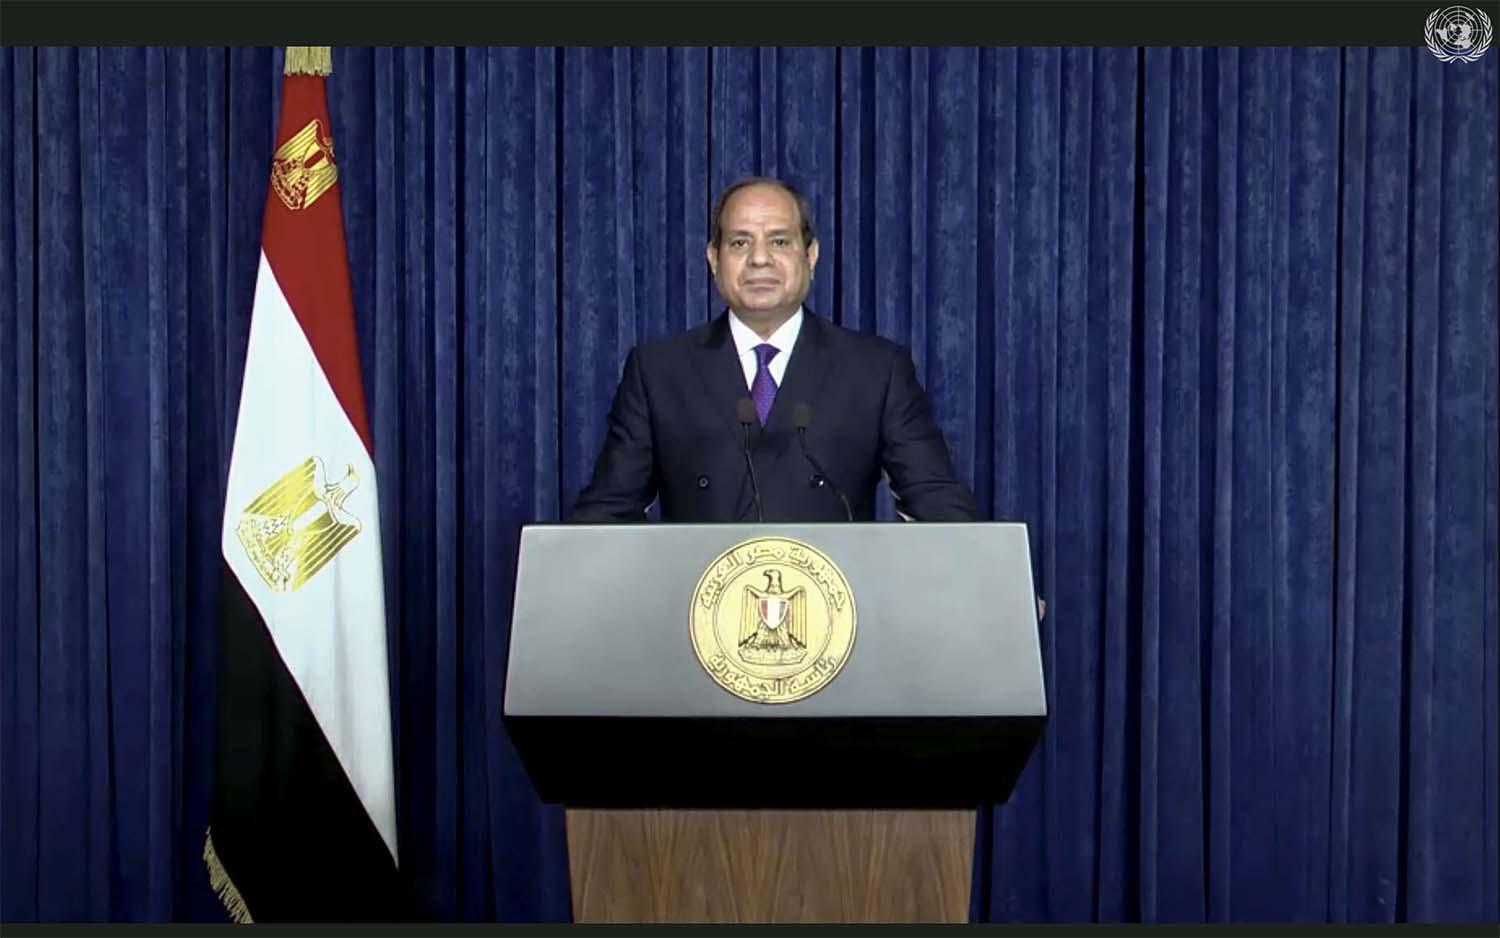 Abdel Fattah al-Sisi speaking in a pre-recorded message which was played during the 75th session of the United Nations General Assembly